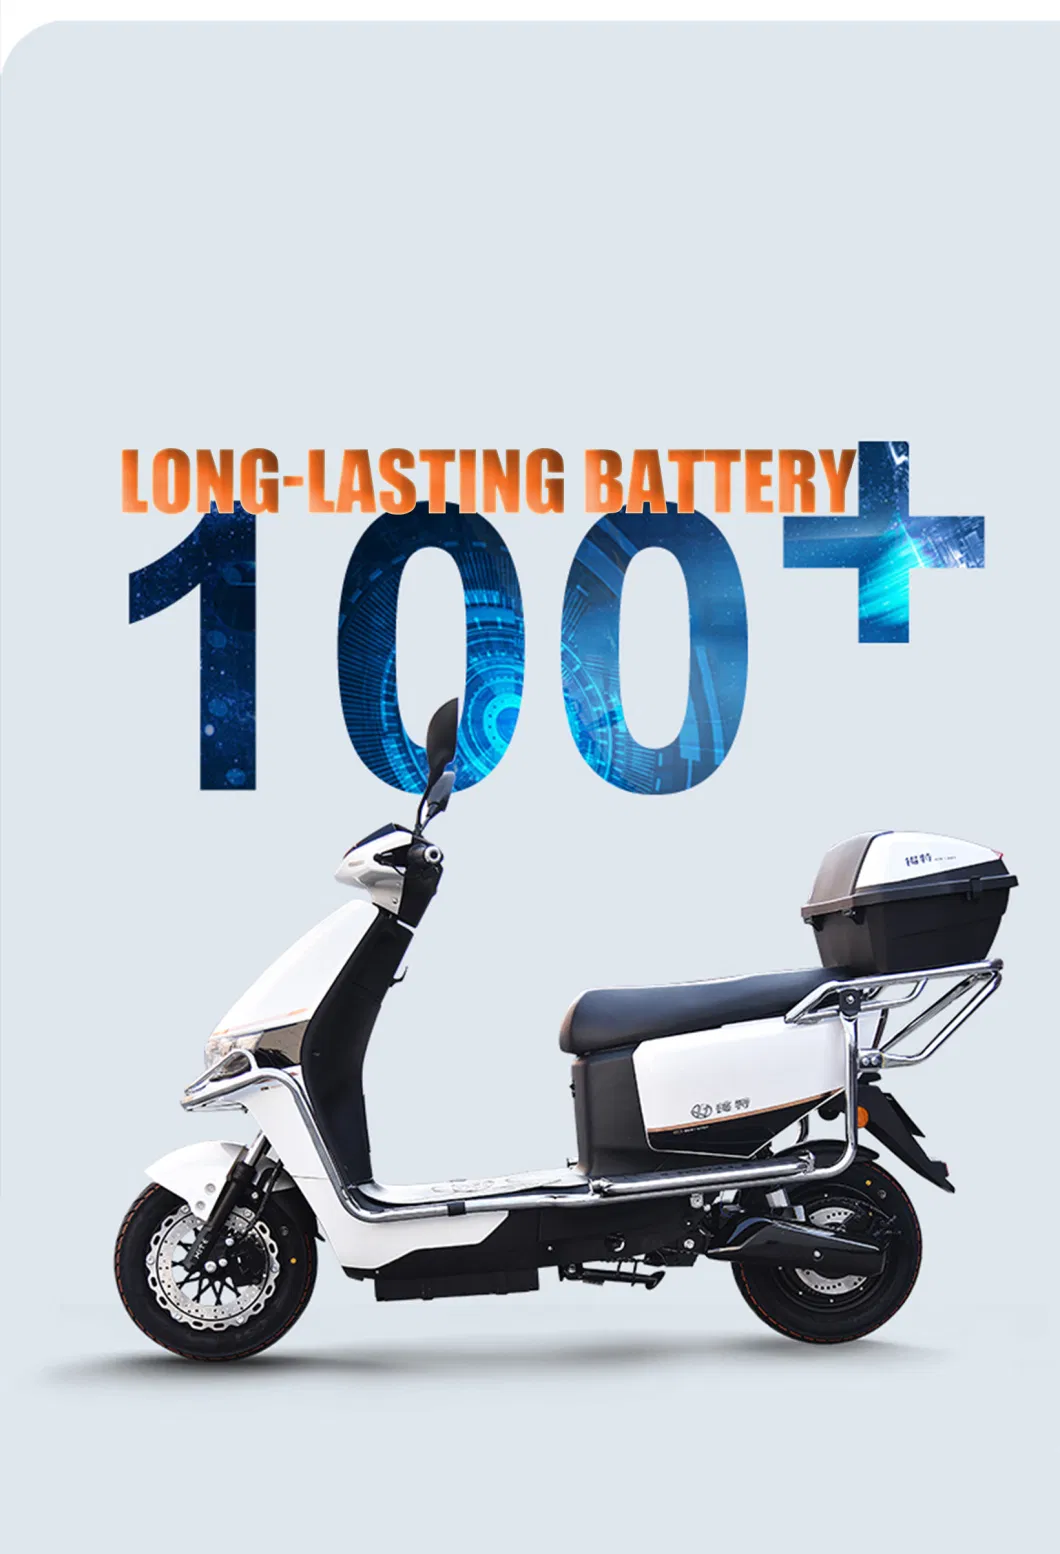 Low Long Lasting Double Mini Cargo Truck Kids 2 Seater Lithium Battery Electric Bike with Competitive Price 800W Brush-Less DC Motor Electric Scooter